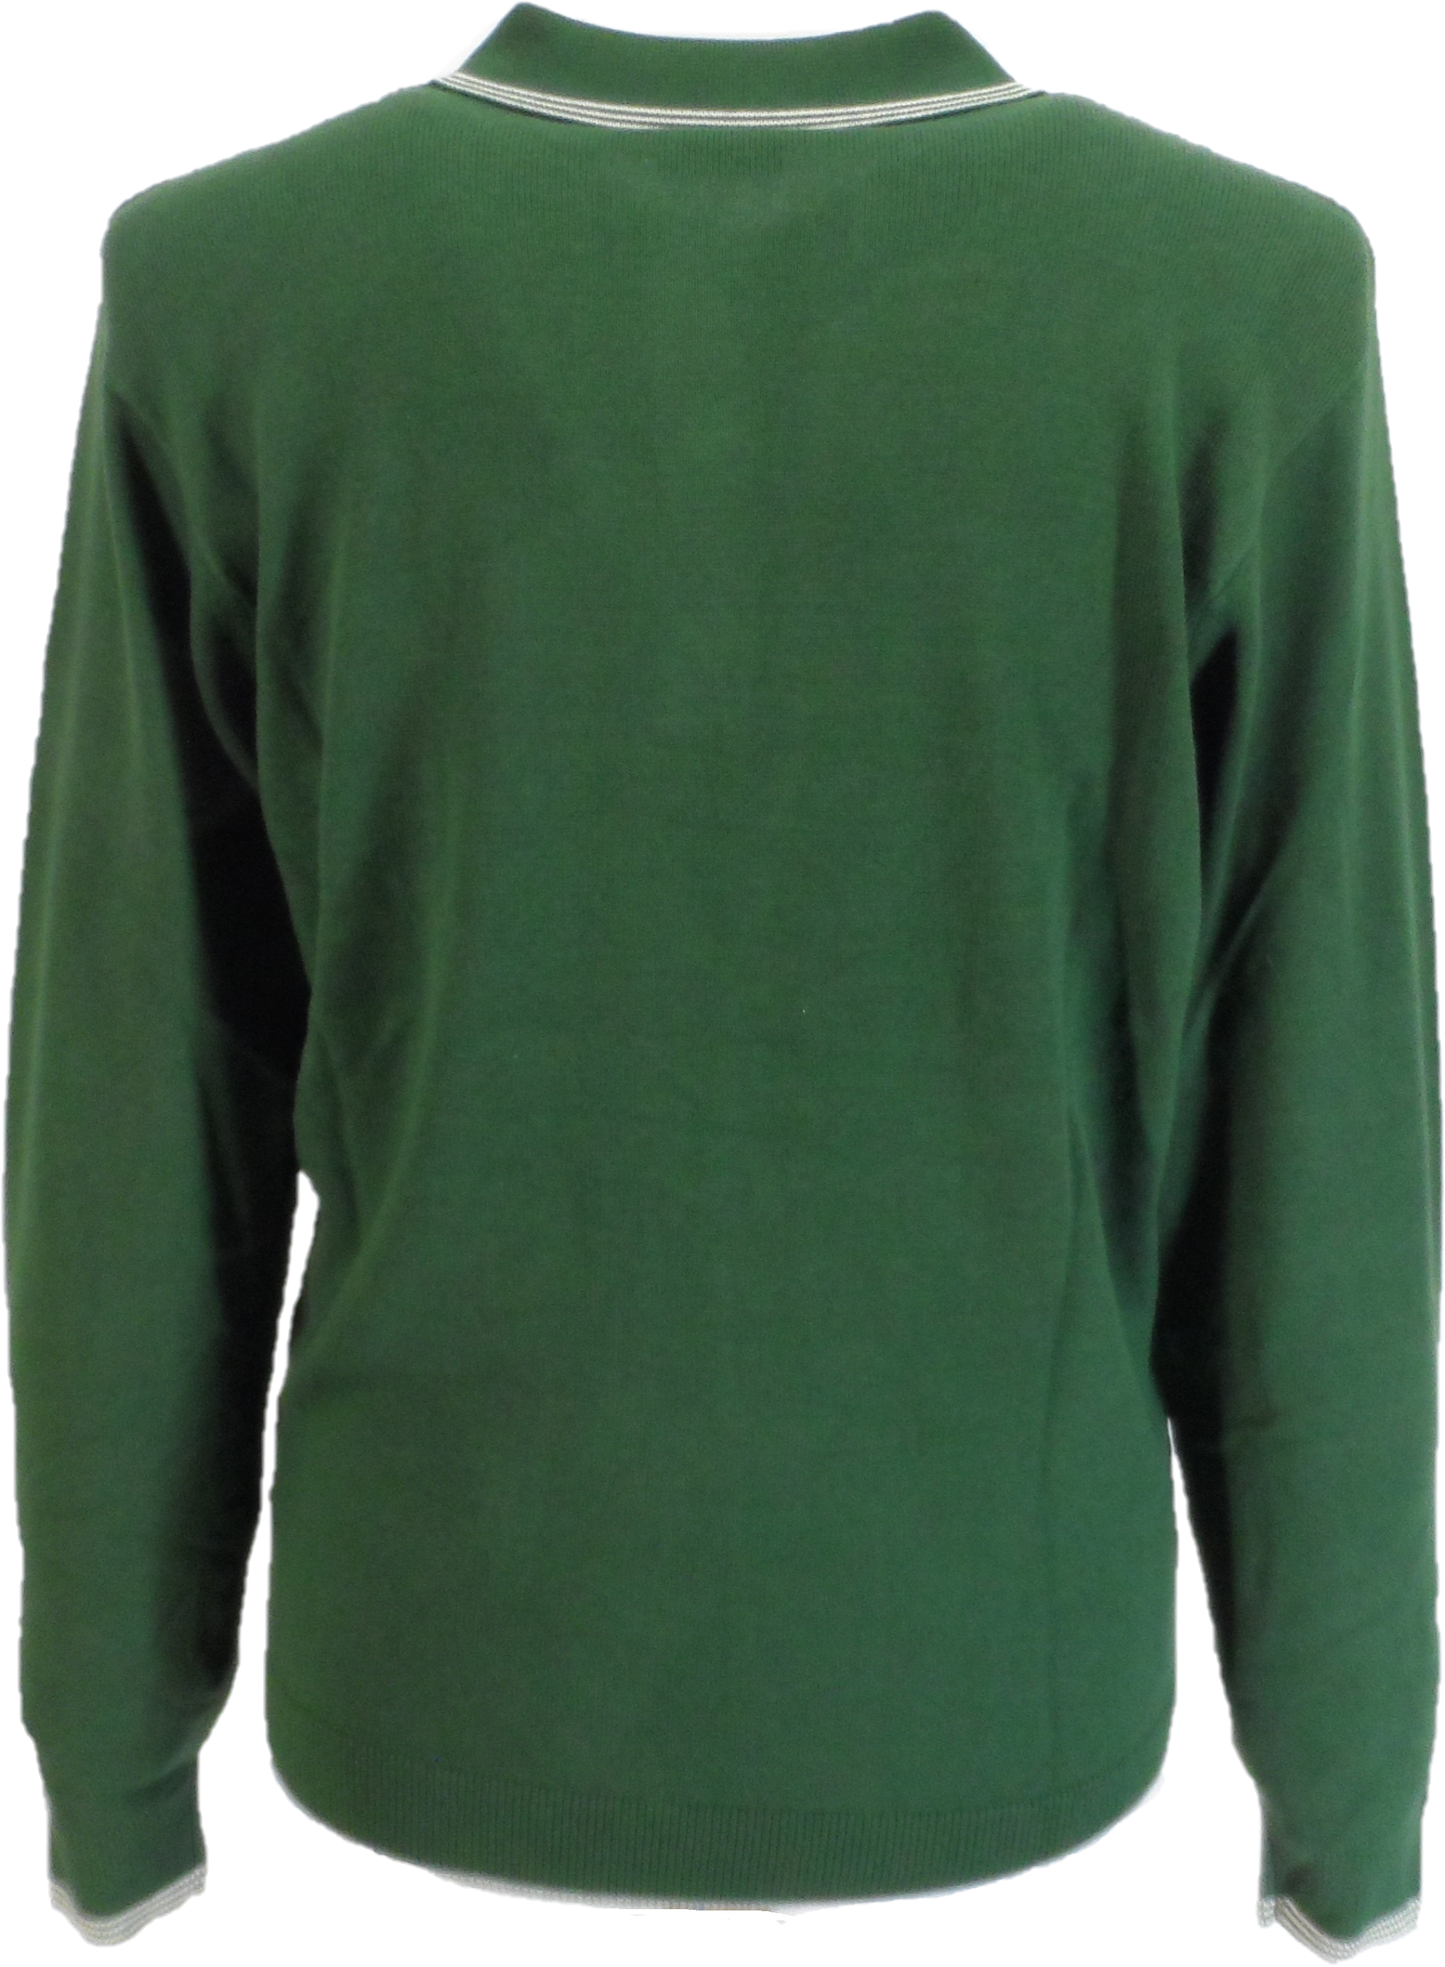 Gabicci Mens Forest Green Textured Retro Knitted Polo